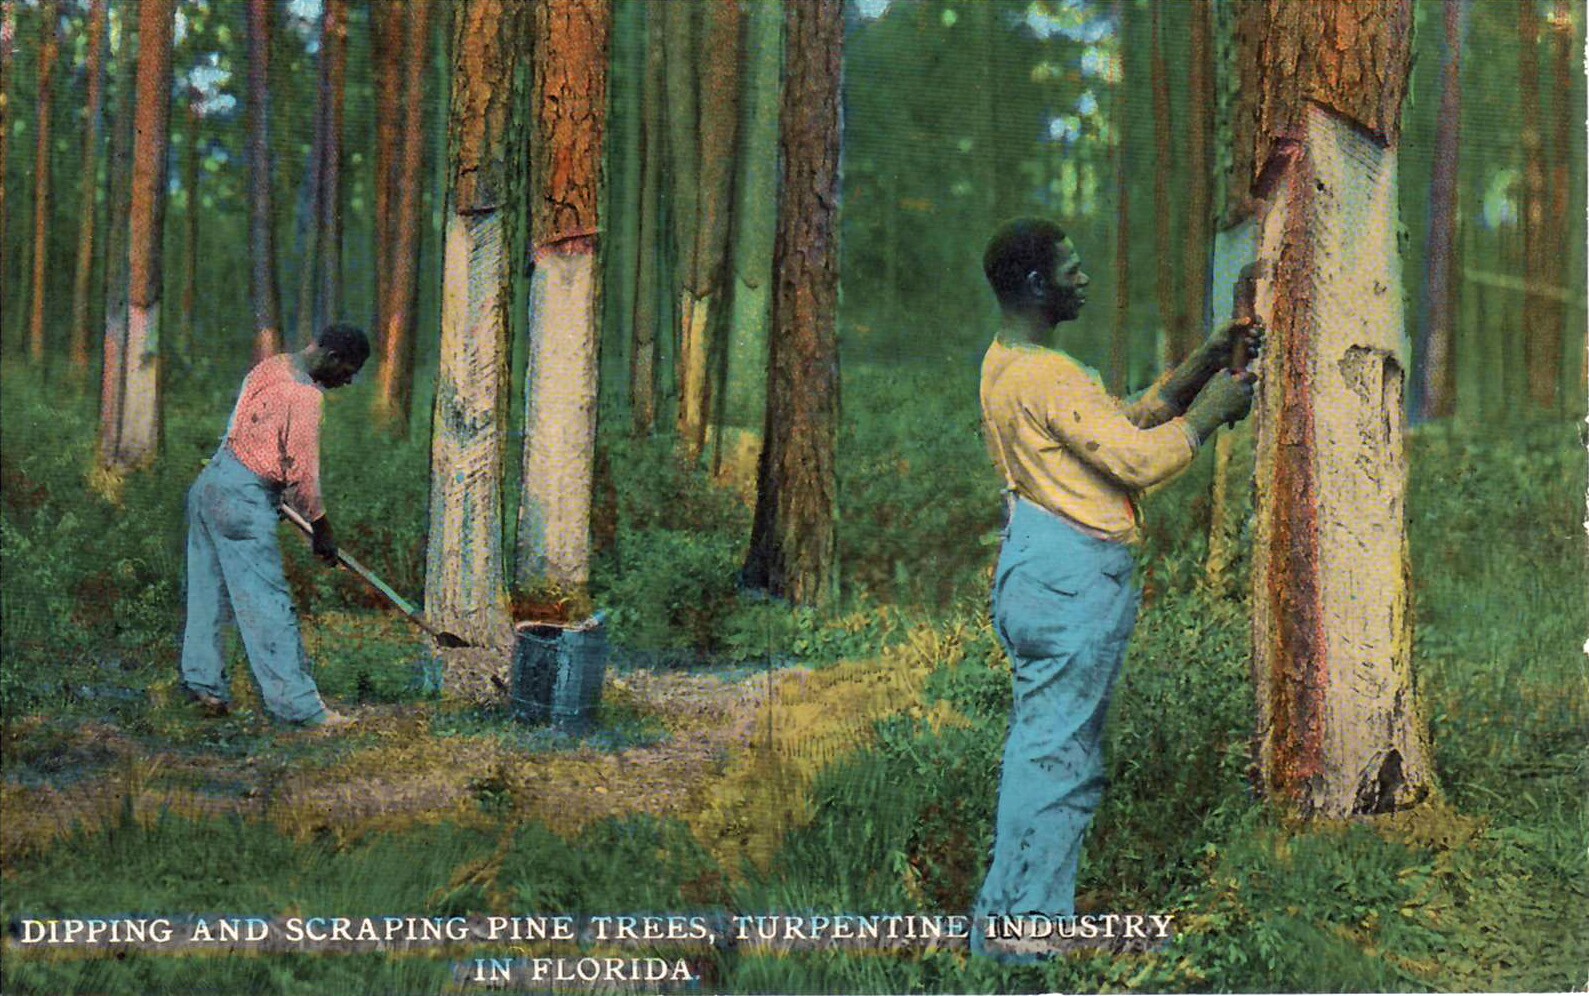 1912 postcard of turpentine workers